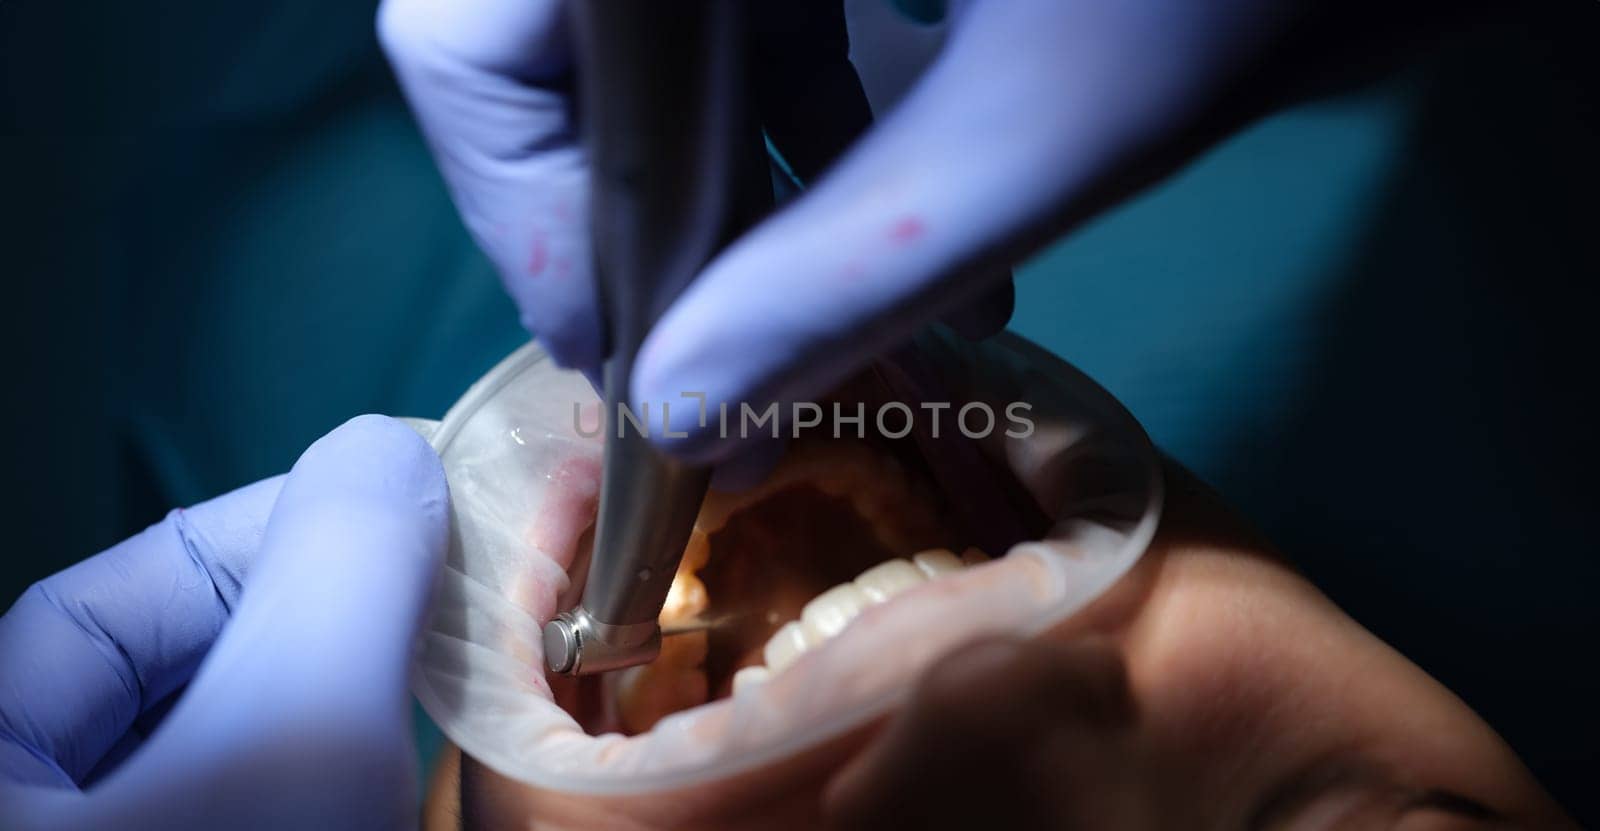 Dentist drills tooth to patient in dental chair. Dental caries treatment concept